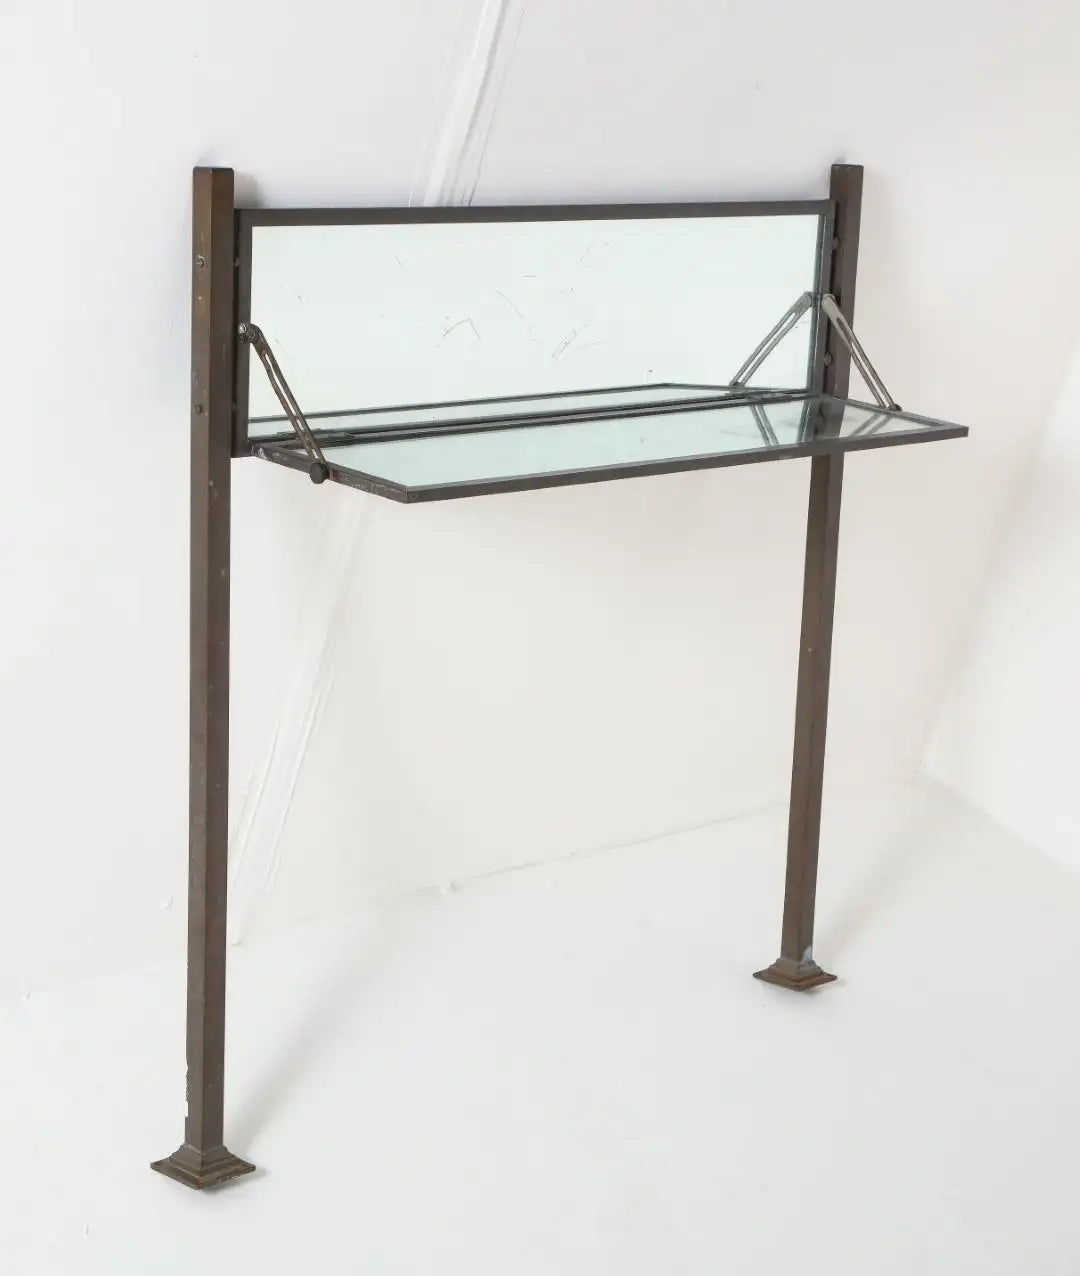 French Mirrored Adjustable Console, circa 1930